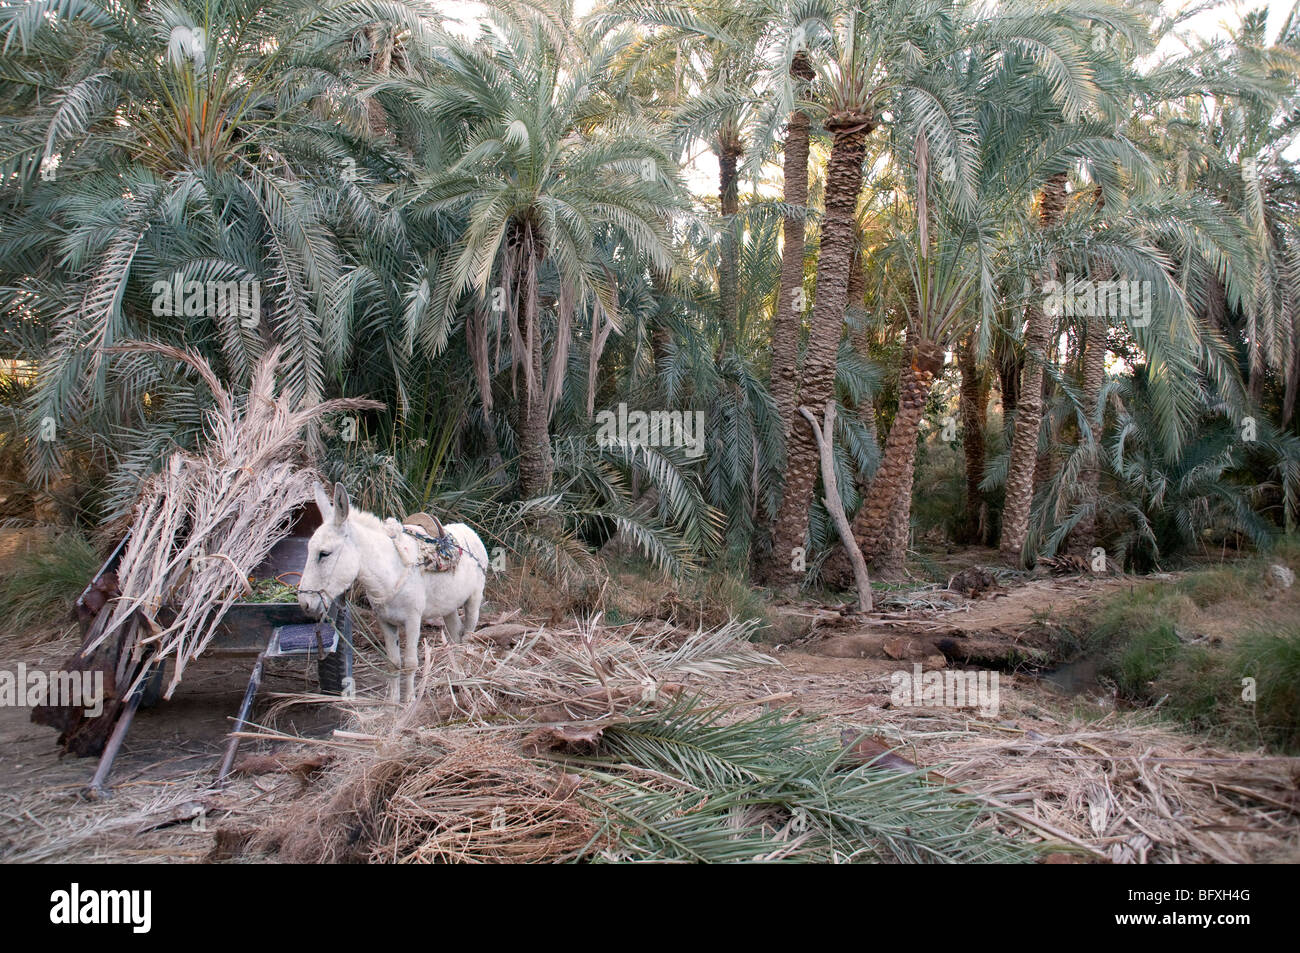 A donkey and cart next to a pile of fronds, on the edge of a palm forest, in the Sahara Desert oasis community of Farafra, Egypt. Stock Photo